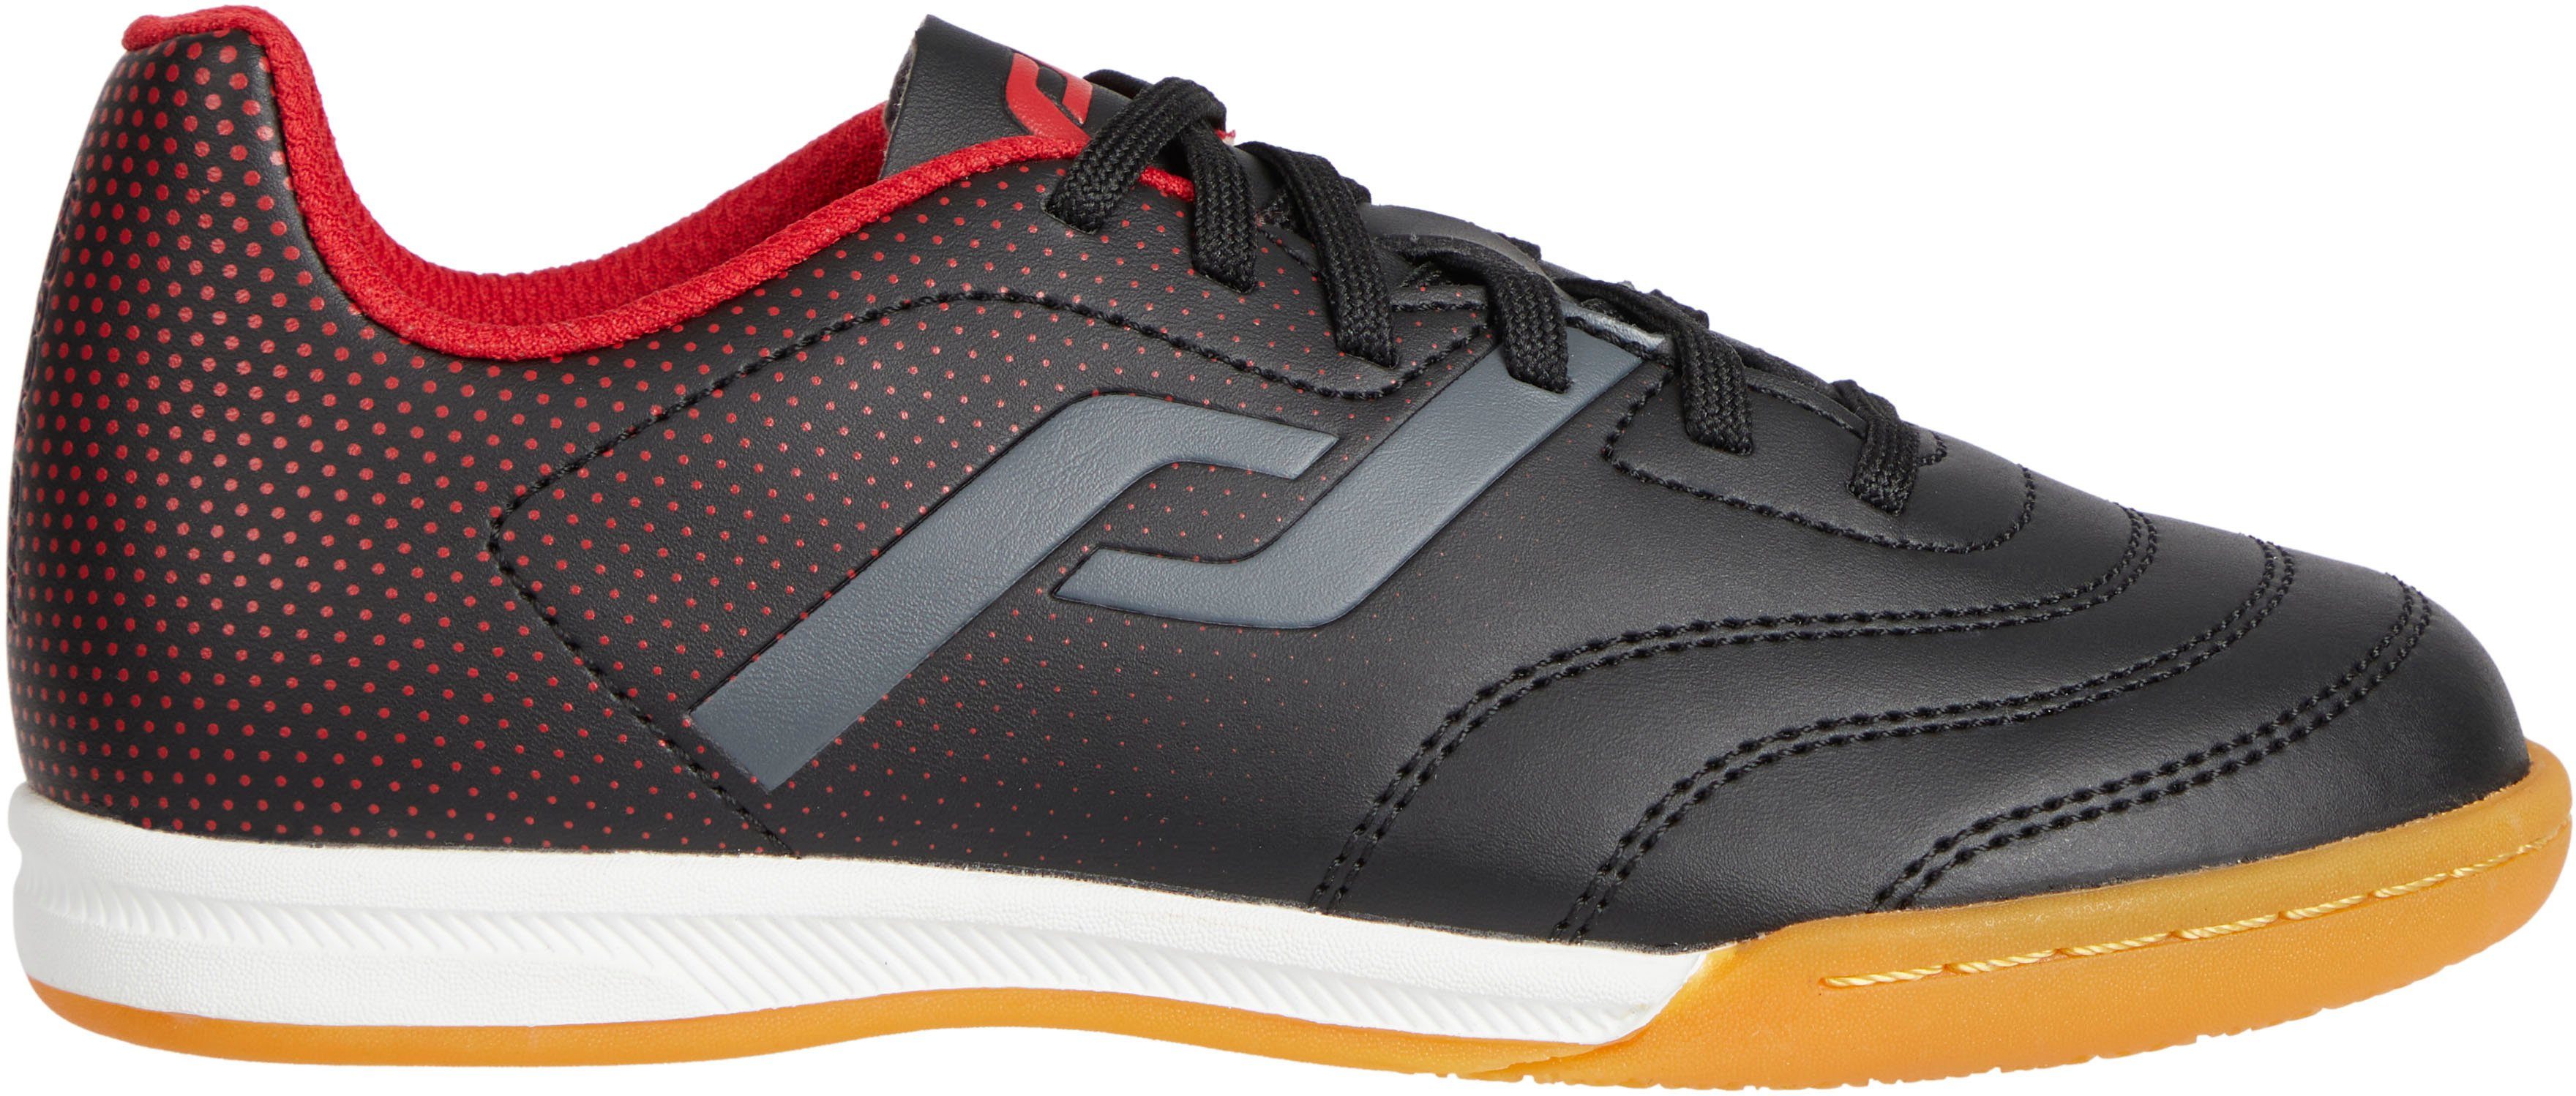 Pro Touch III IN Ind JR Classic BLACK/RED/ANTHRACITE Fußballschuh